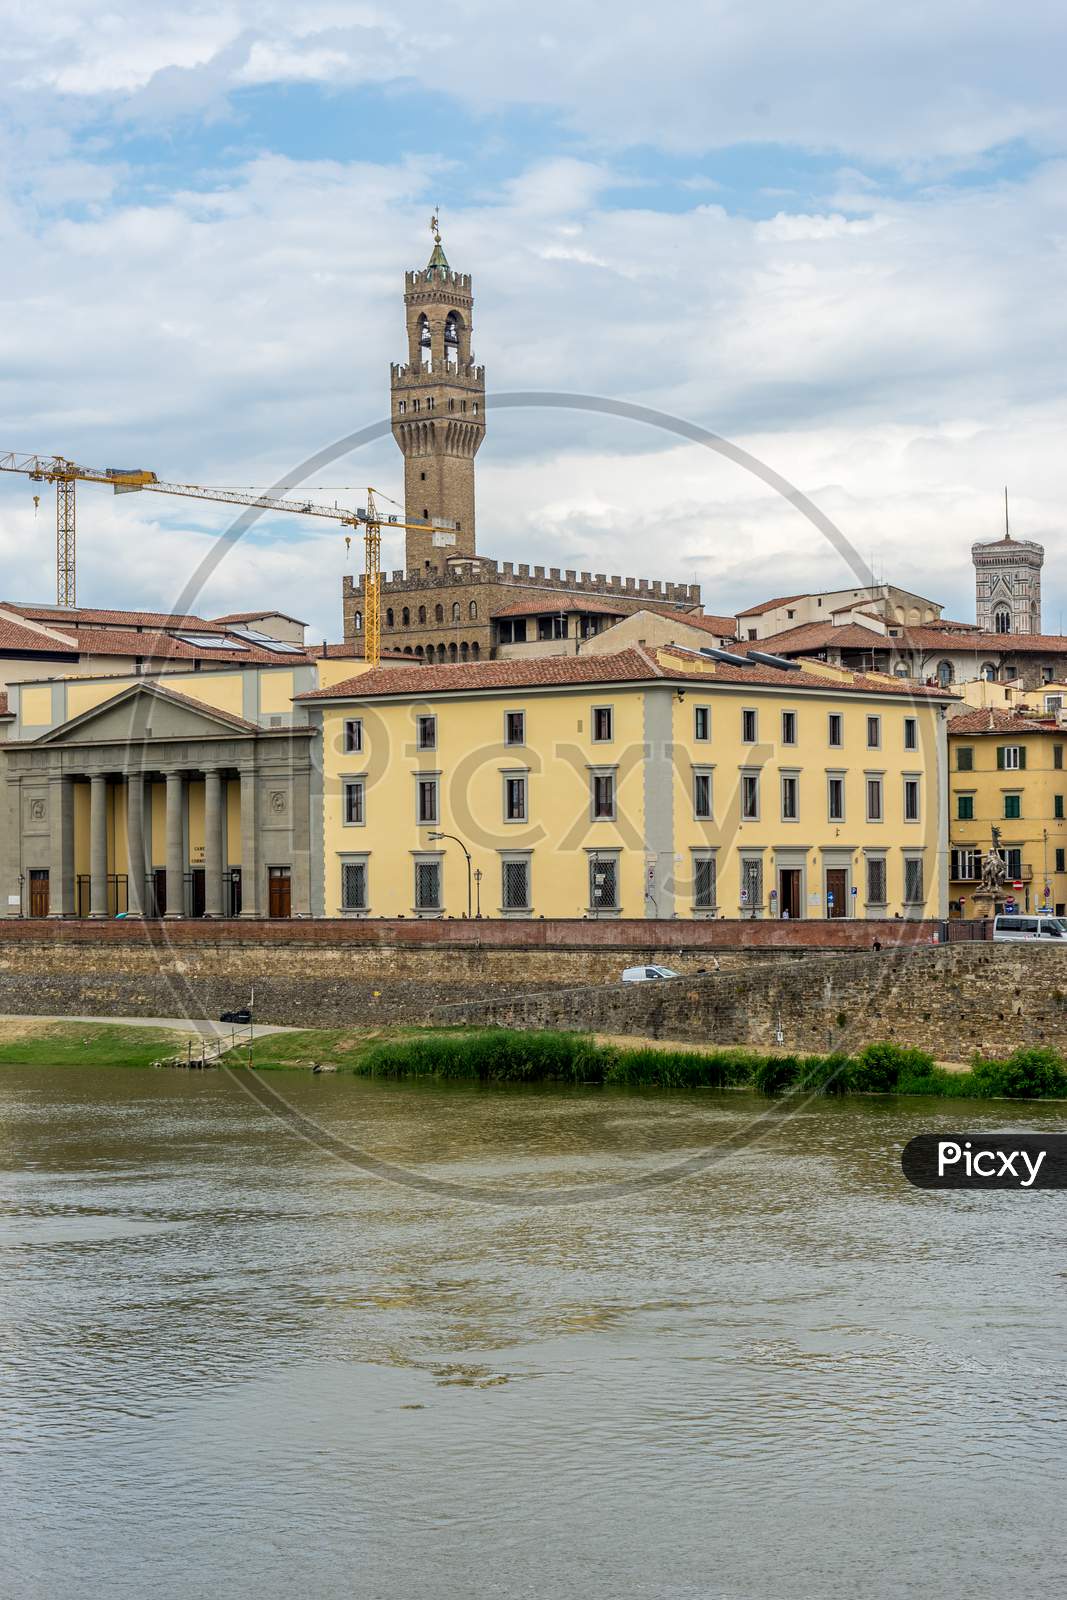 Florence, Italy - 25 June 2018: The Palazzo Vecchio Over The Arno River In Florence, Italy